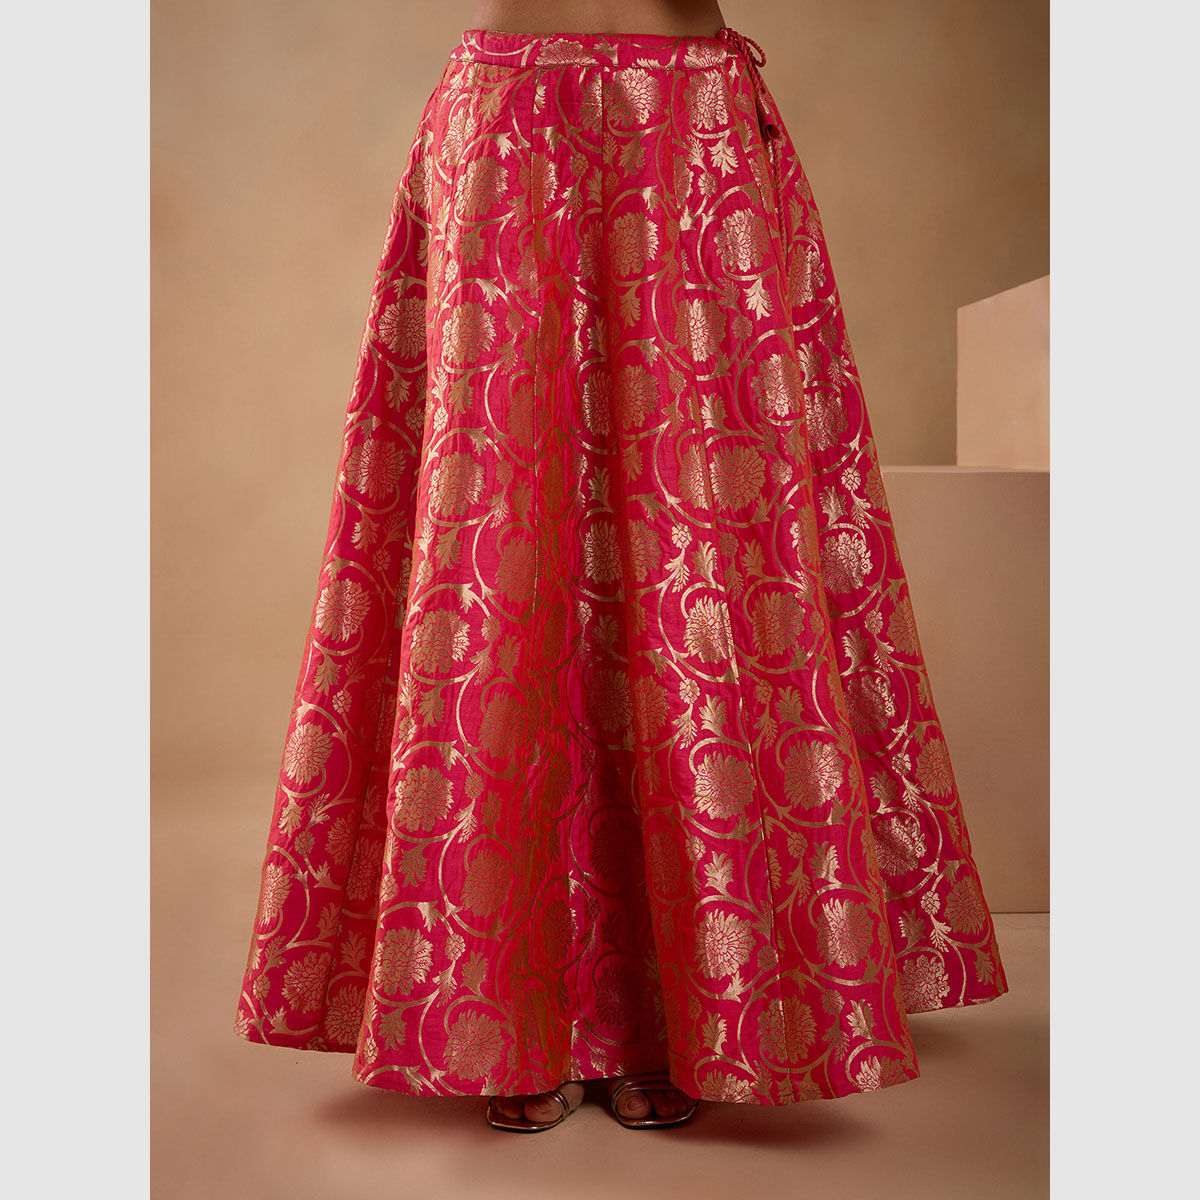 Buy SIDDIQUI SISTERS' WOMEN RED AND GOLDEN BROCADE SKIRT at Amazon.in